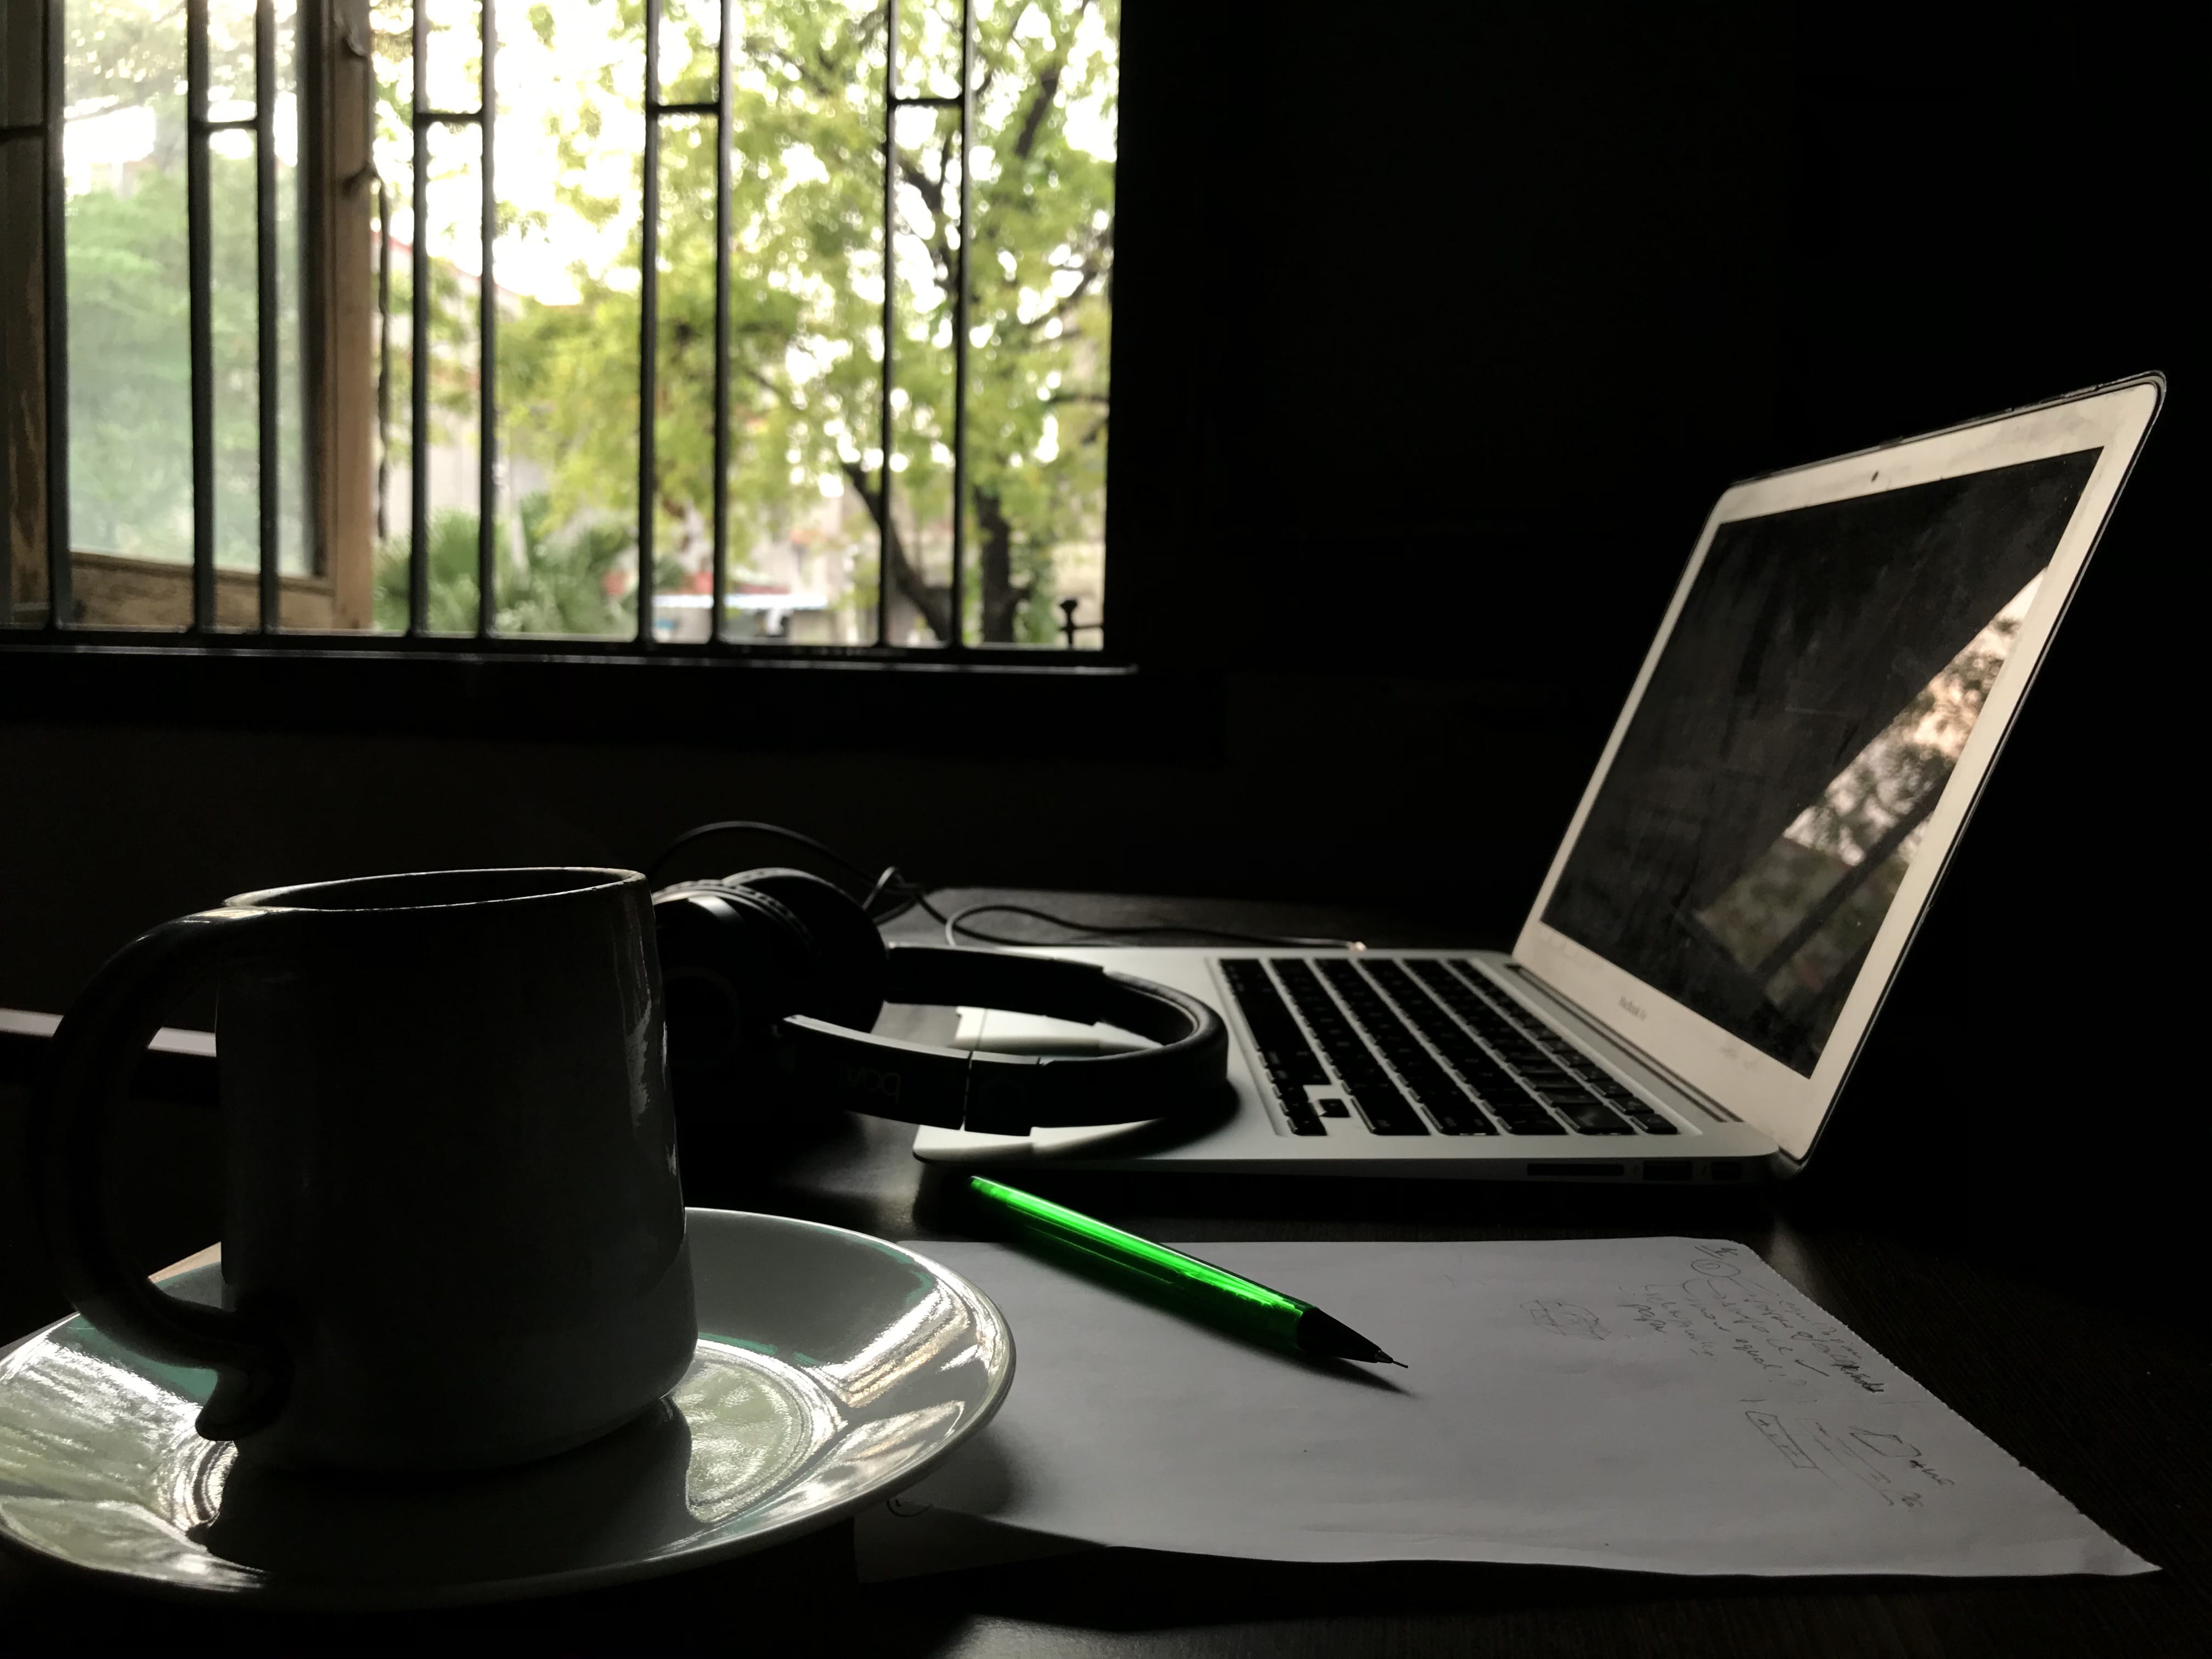 Photograph of a laptop, pair of headphones, and a pencil on a piece of paper; Labelled 'Ideas'